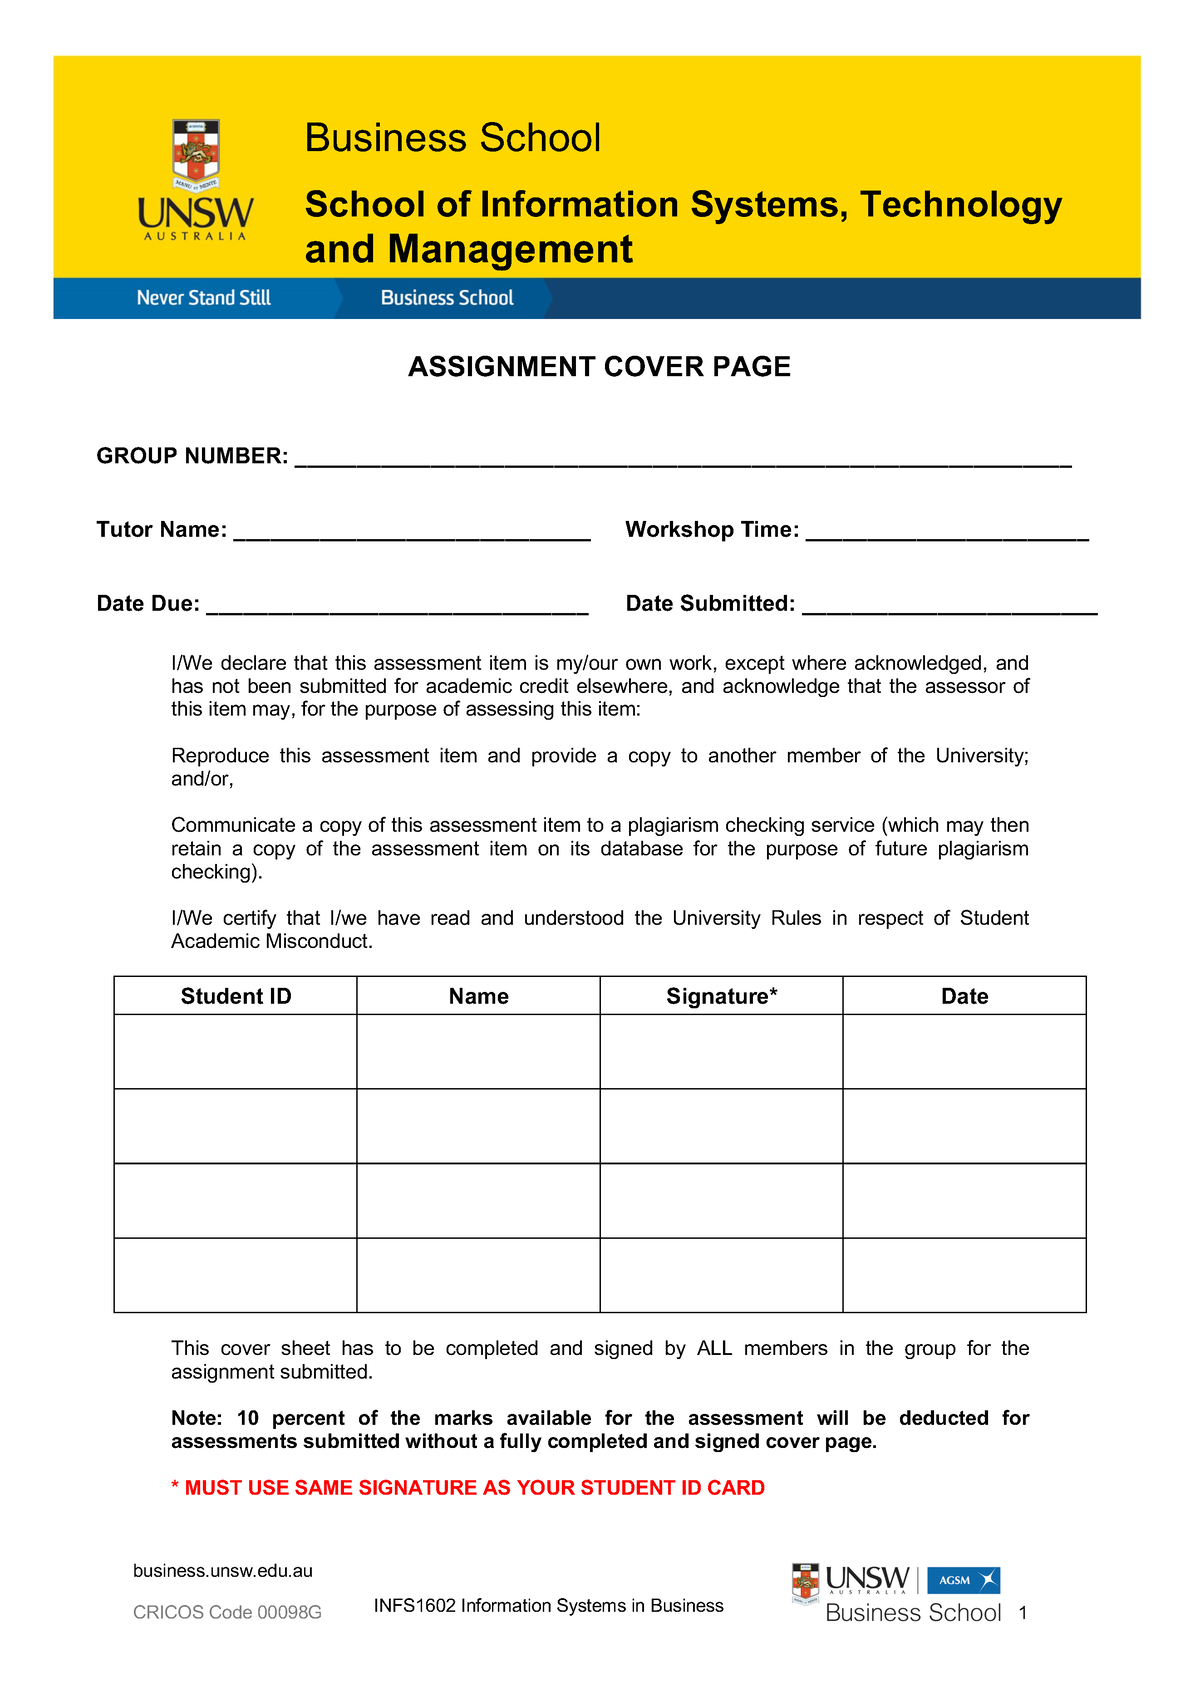 unsw assignment cover sheet engineering